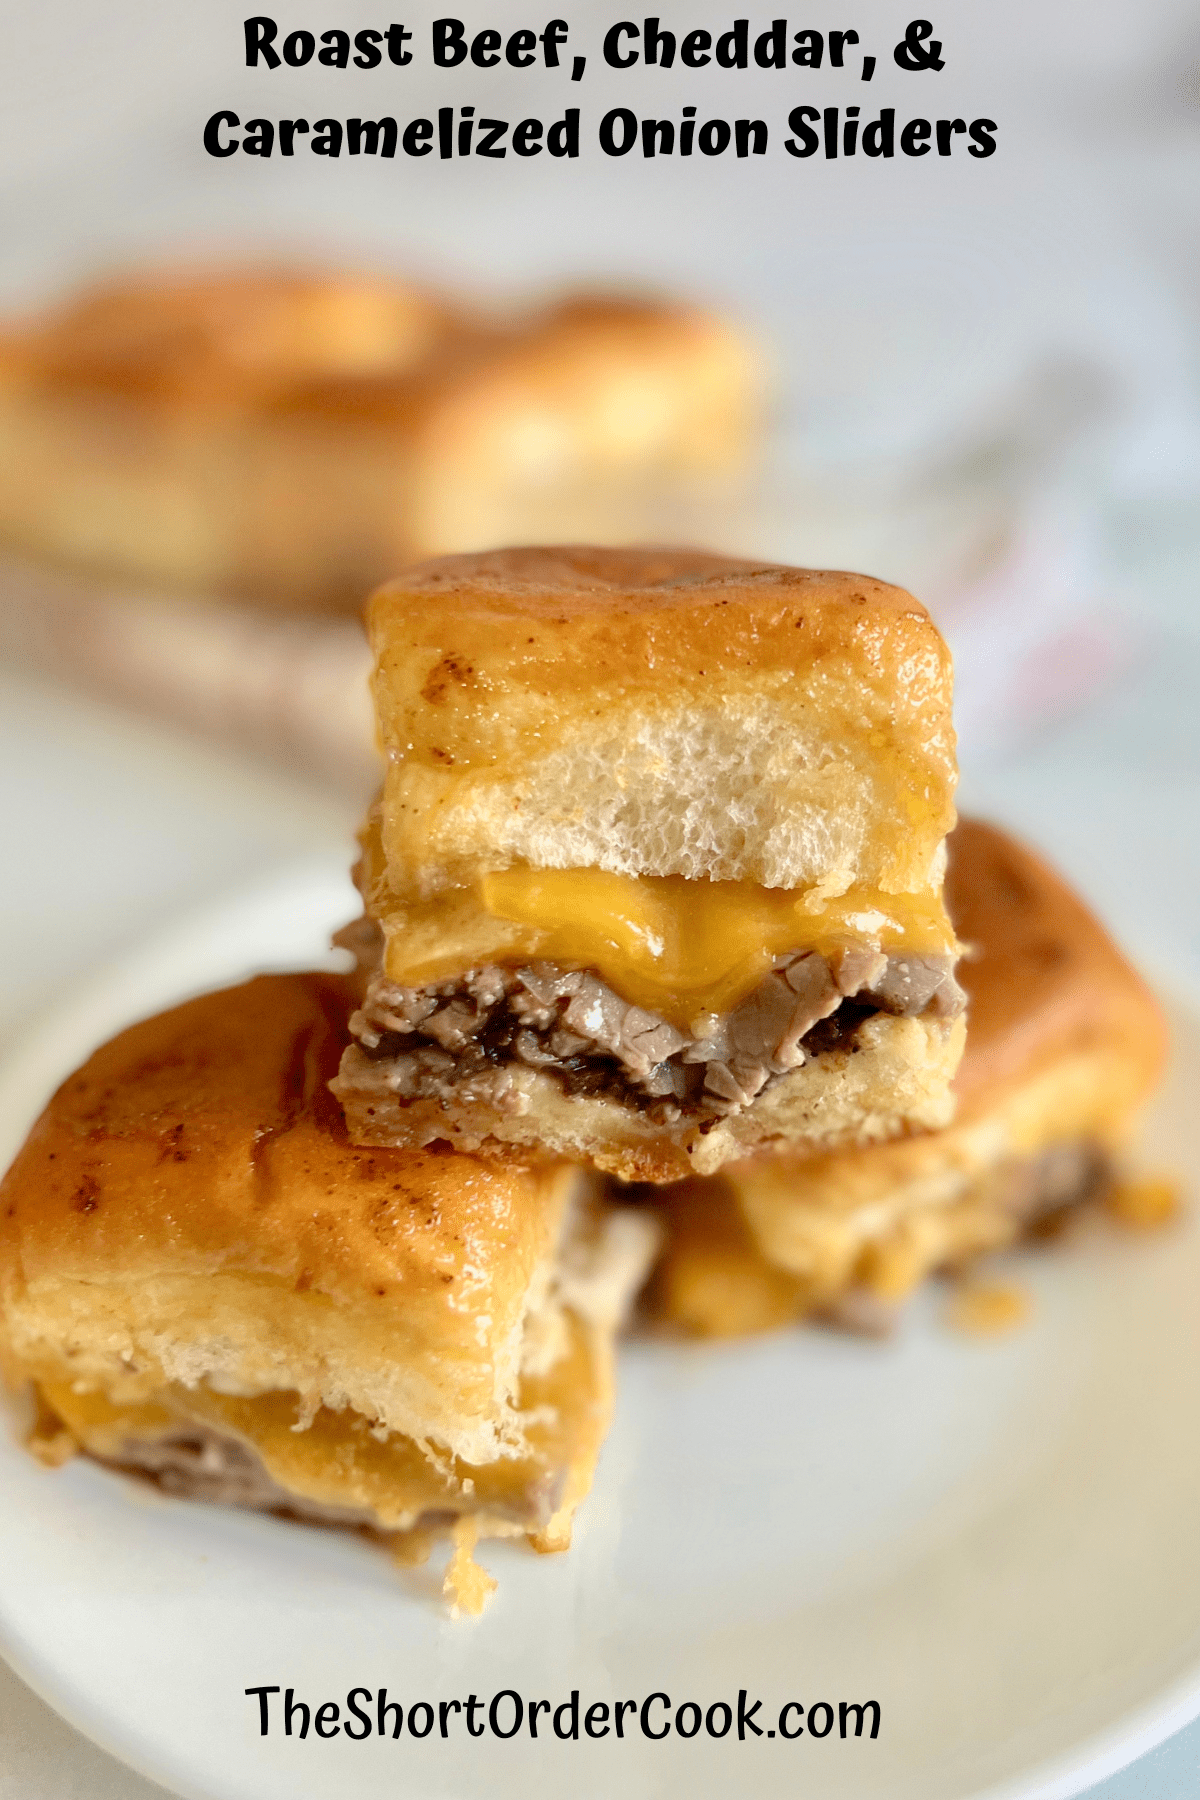 Roast Beef, Cheddar, & Caramelized Onion Sliders 3 on a plate.